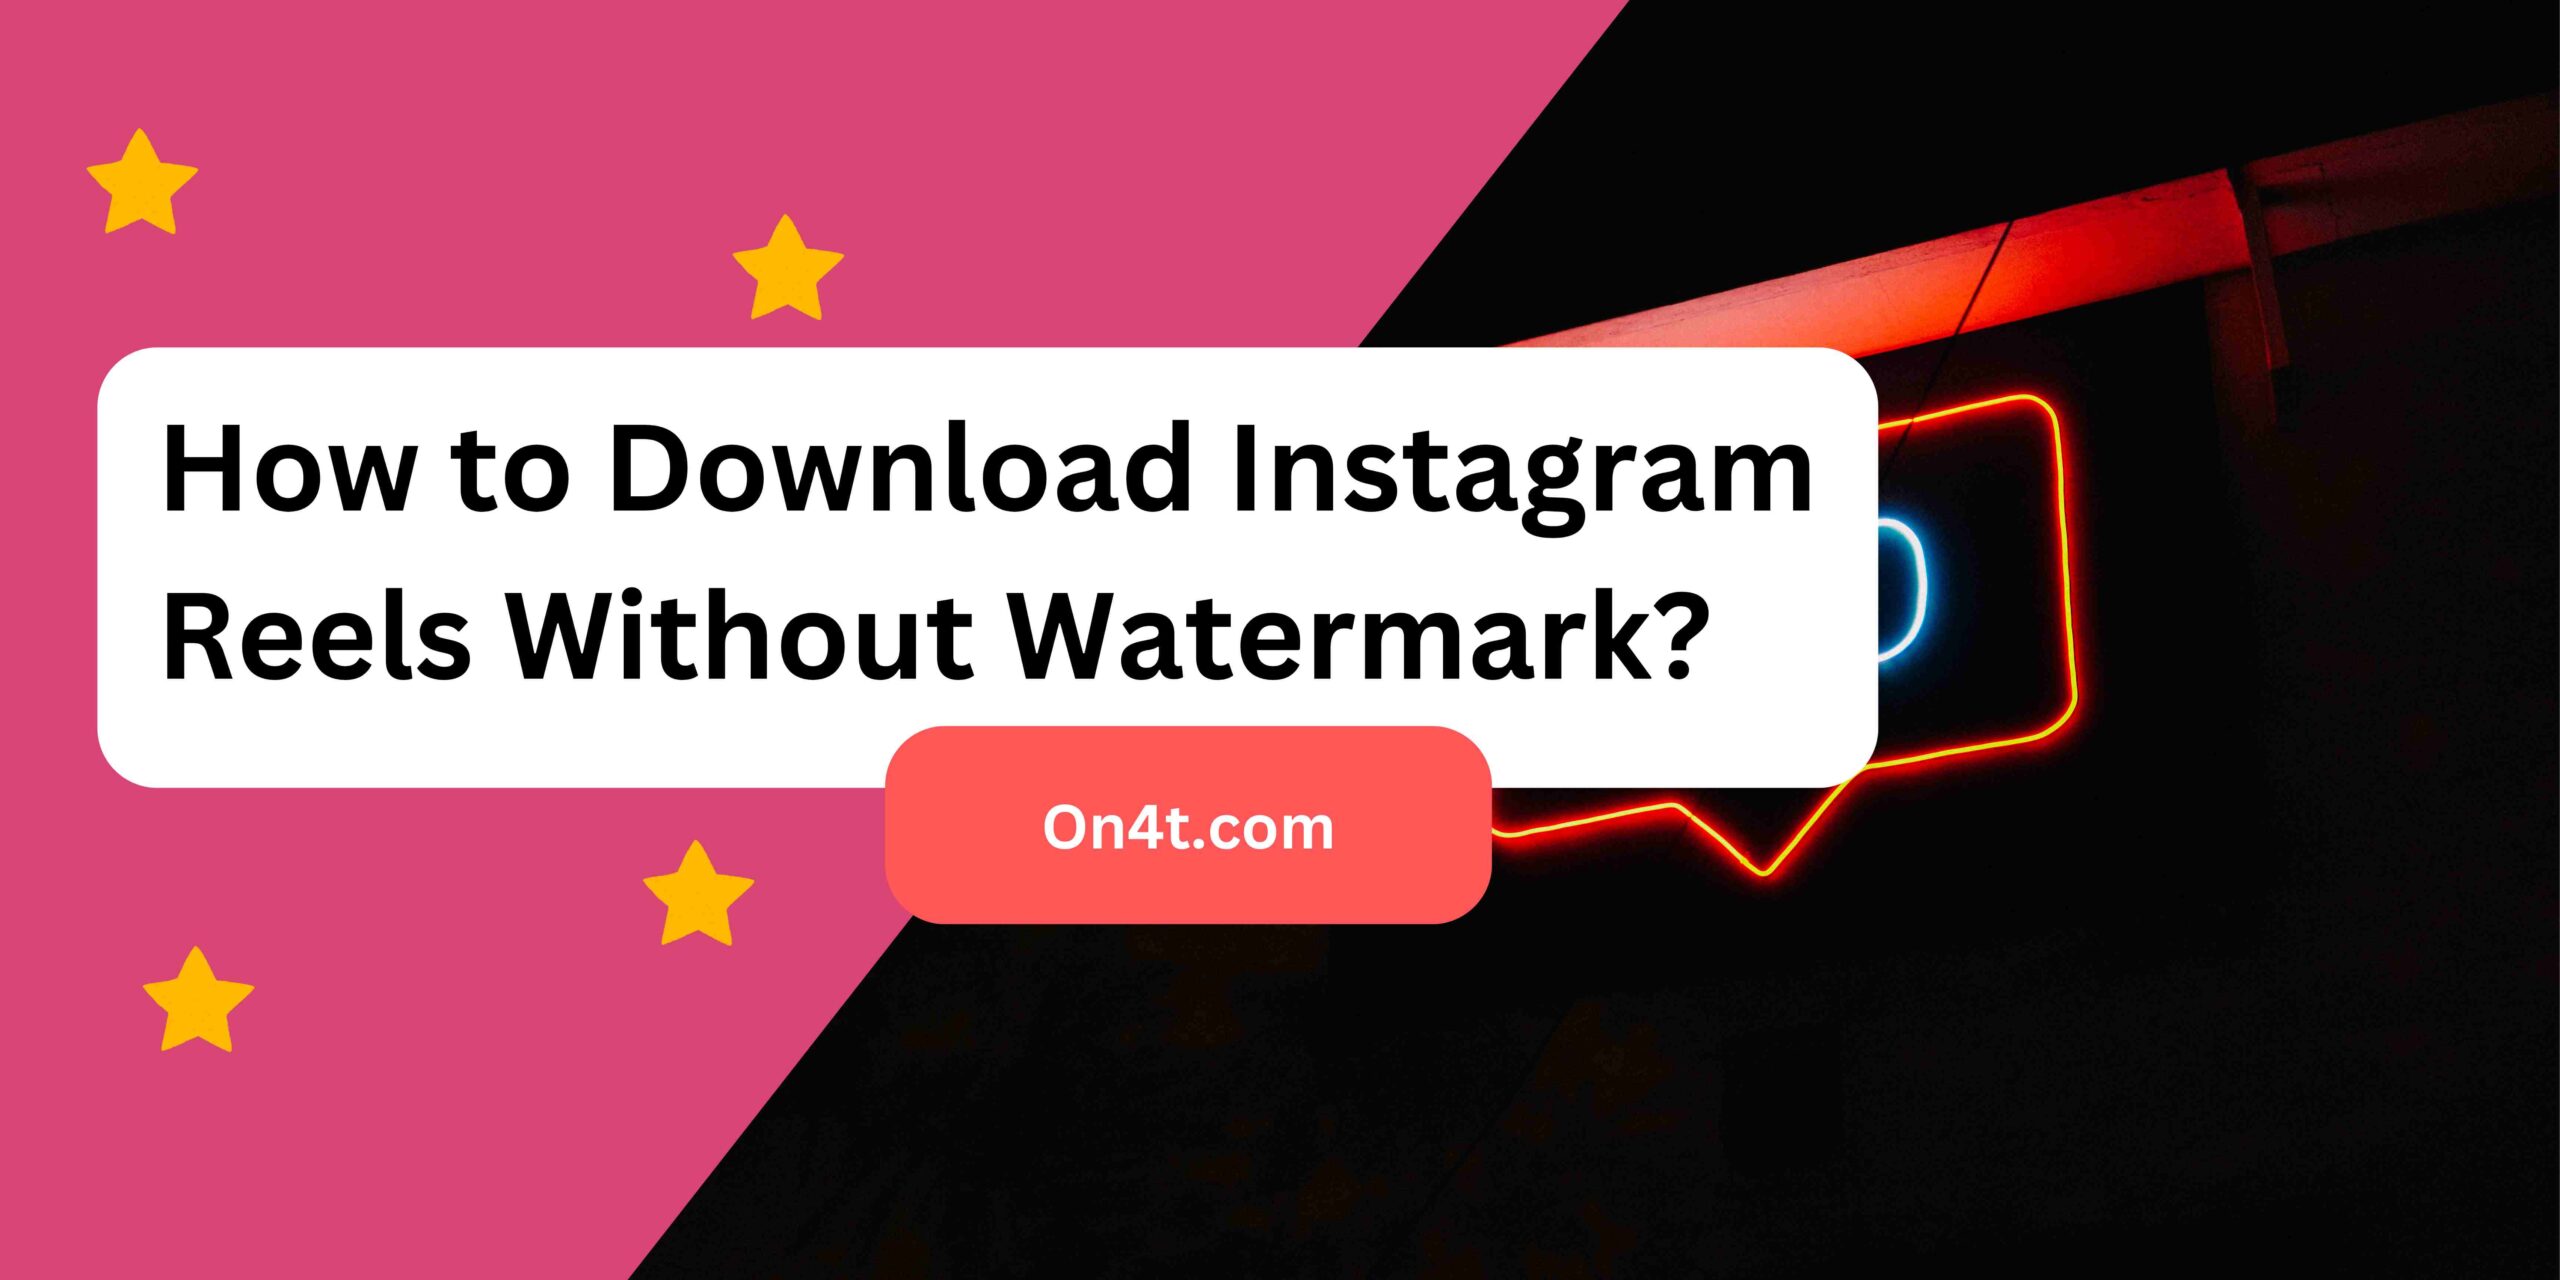 How to Download Instagram Reels Without Watermark